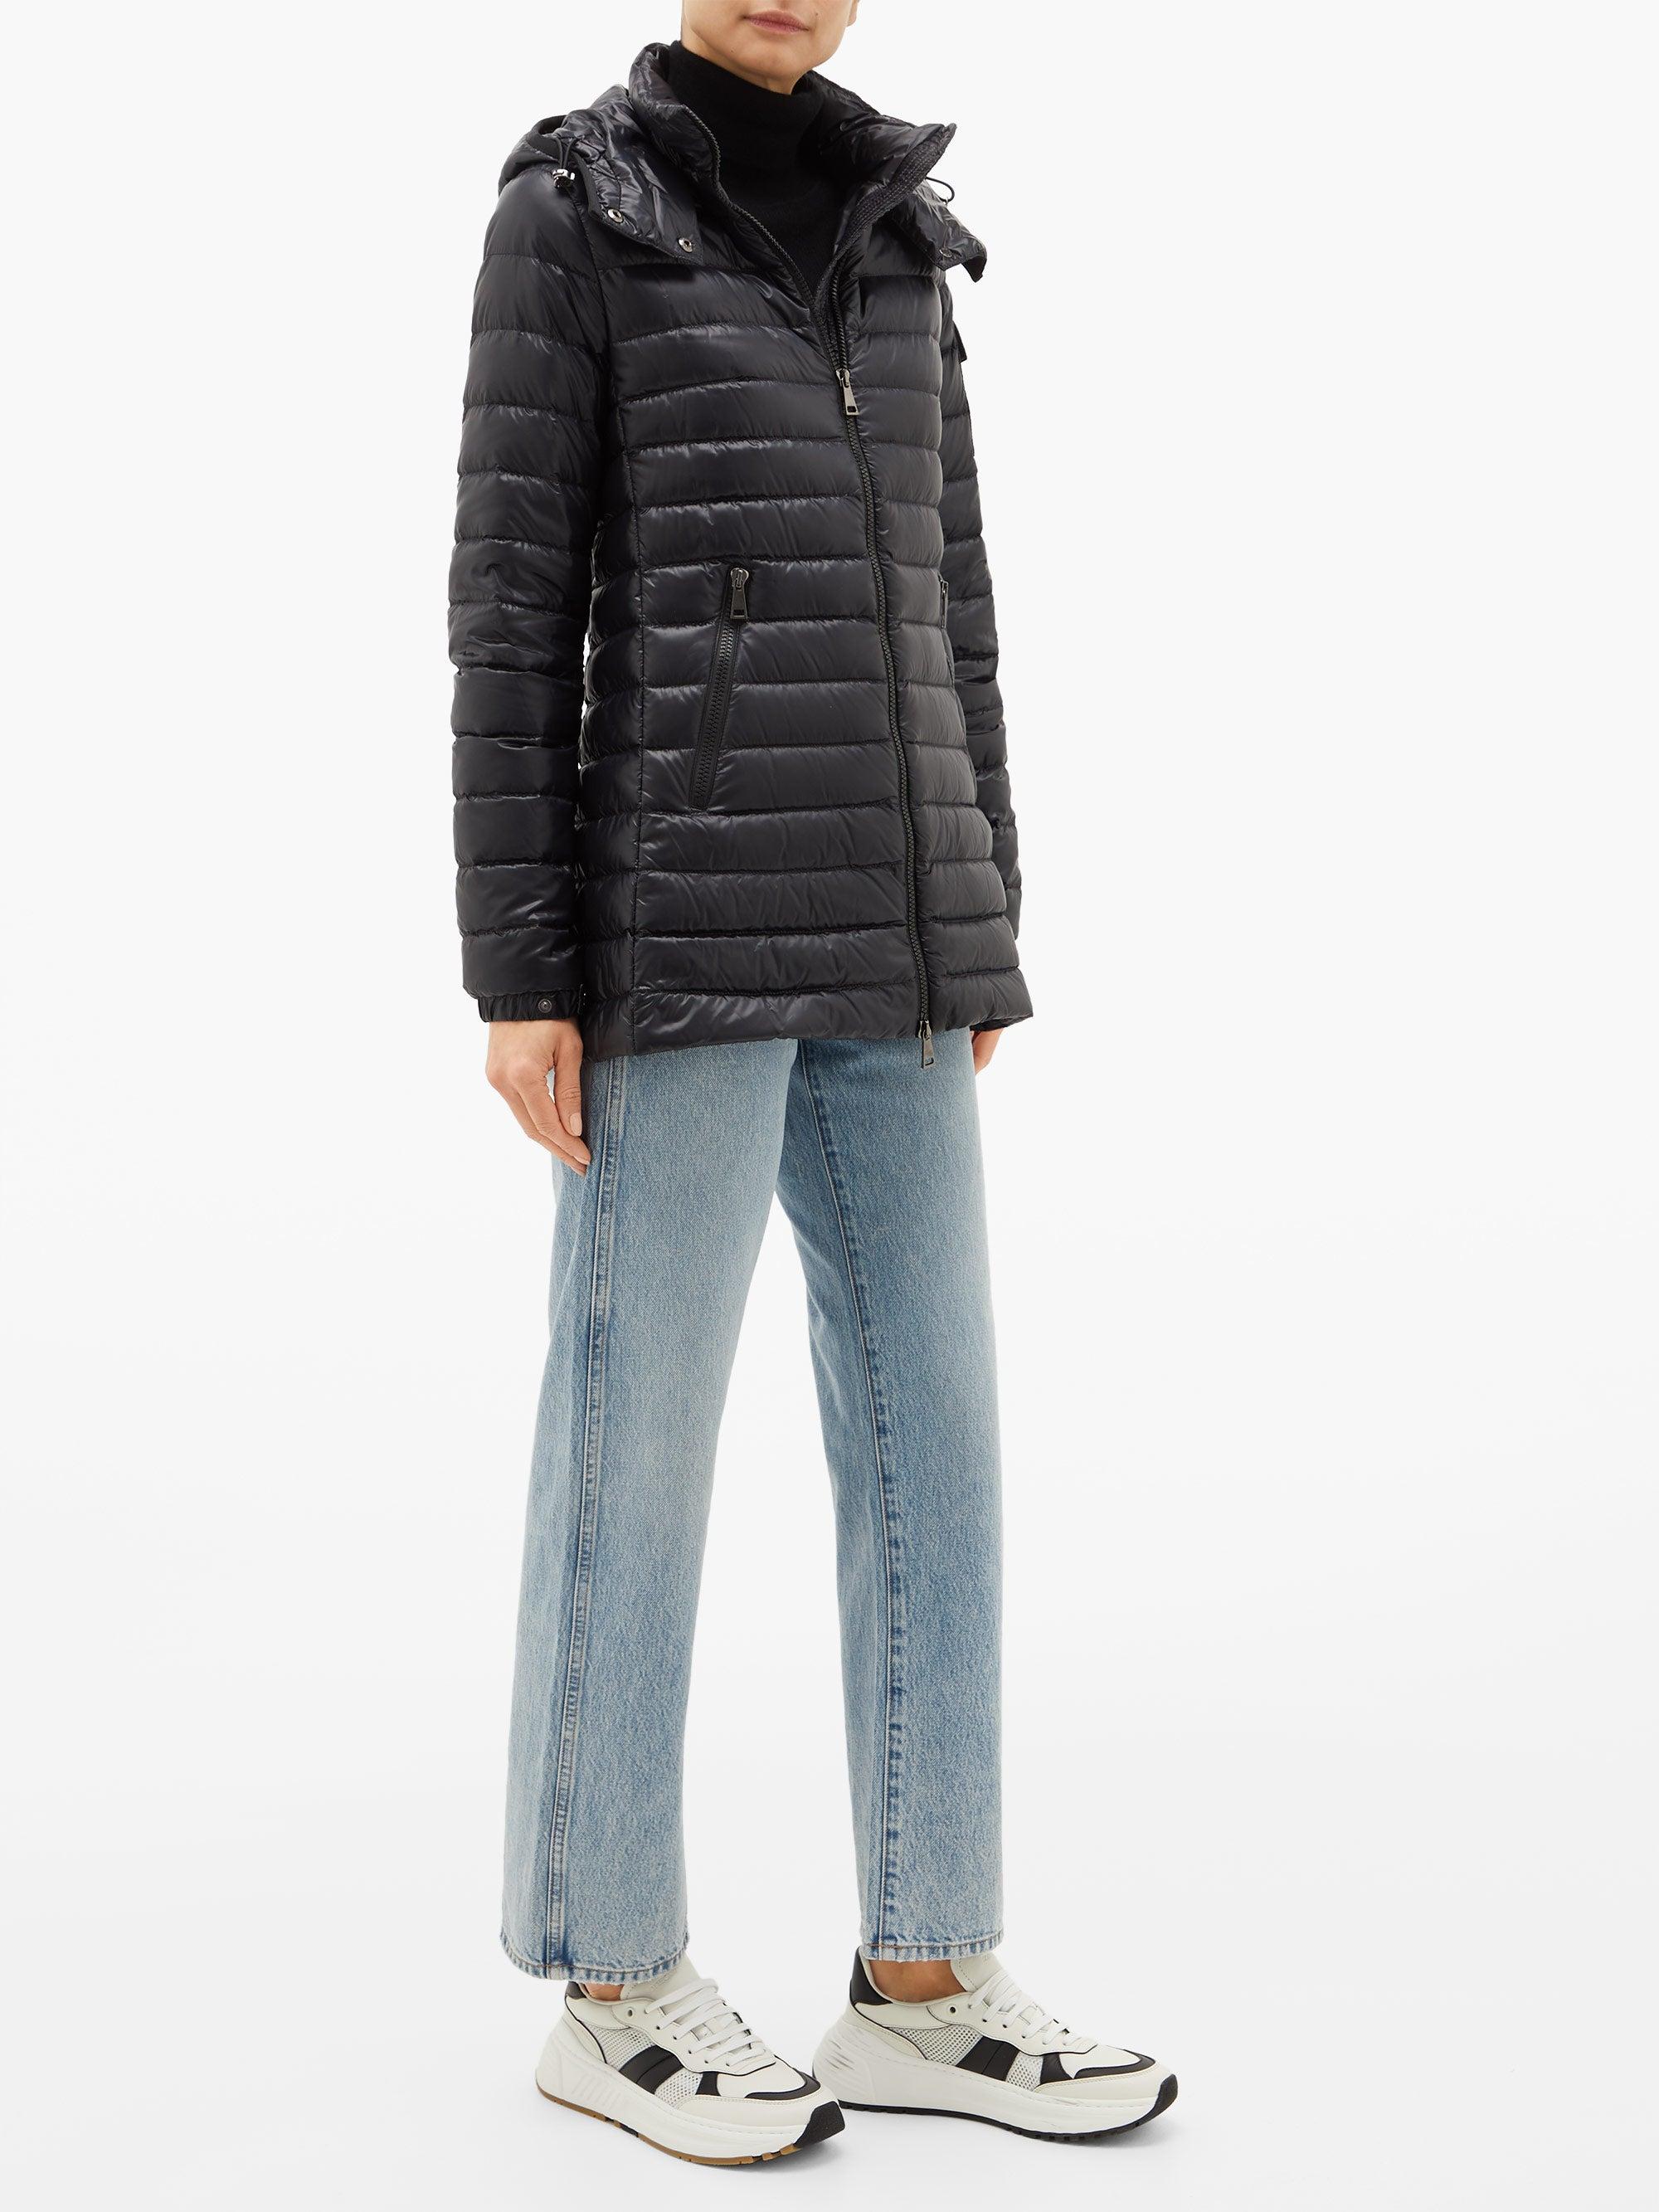 Moncler Synthetic Menthe Giubbotto Hooded Drawstring Puffer Coat in Black -  Lyst